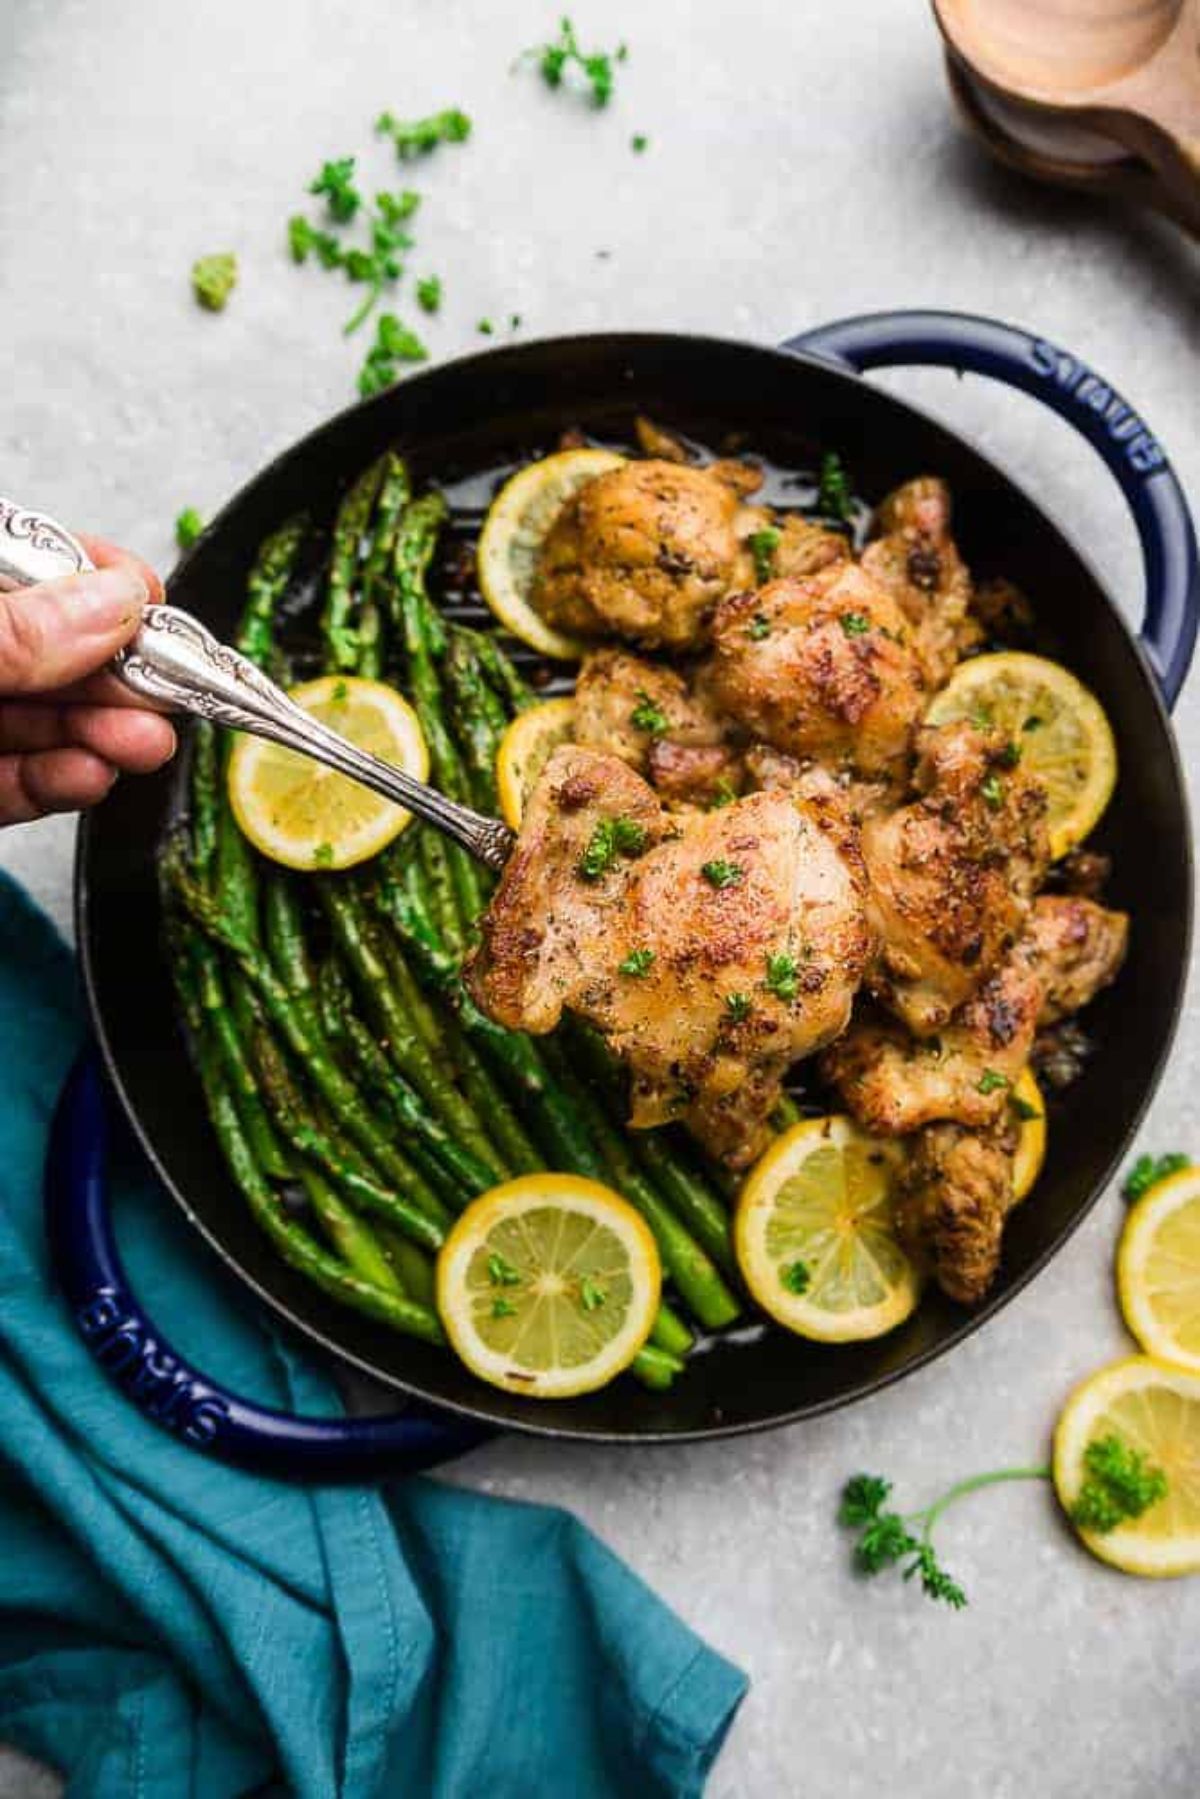 On a light gray surface is a cast iron casserole dish filled with asparagus stalks, chicken and lemon slices. A hand is using a silver spoon to lift out a piece of chicken. Scattered around are chopped herbs and lemon slives